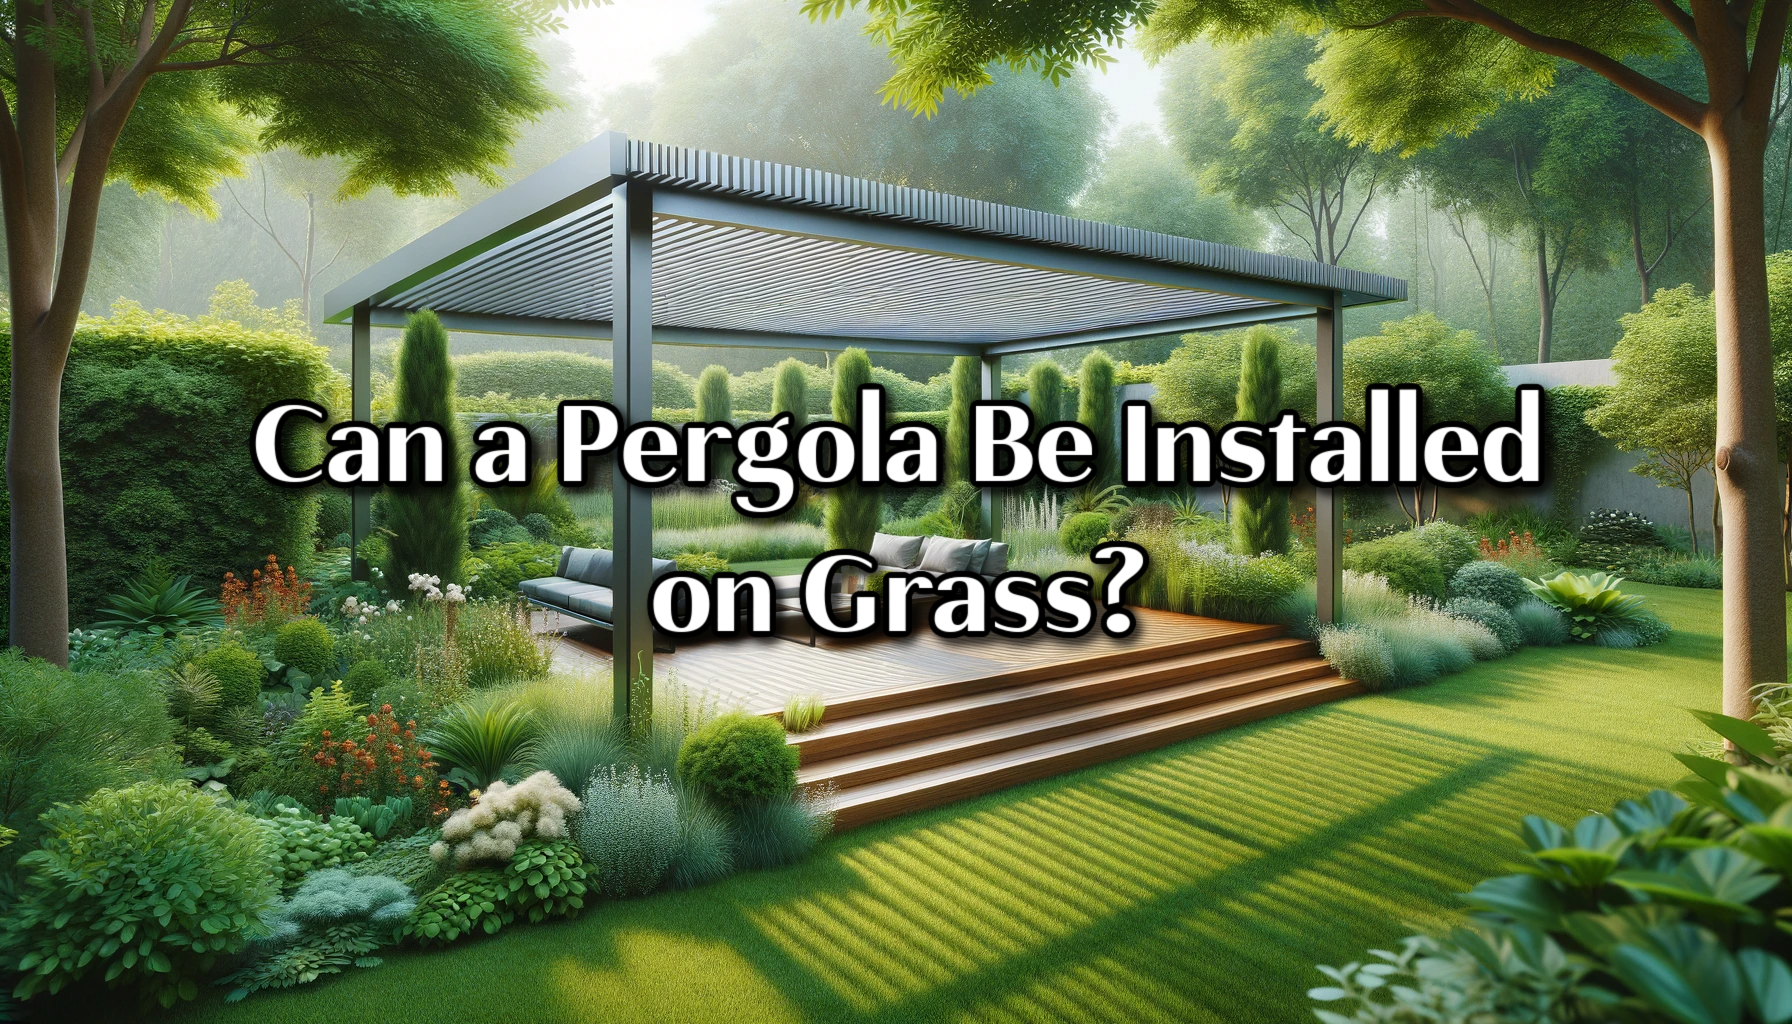 Can a Pergola Be Installed on Grass?